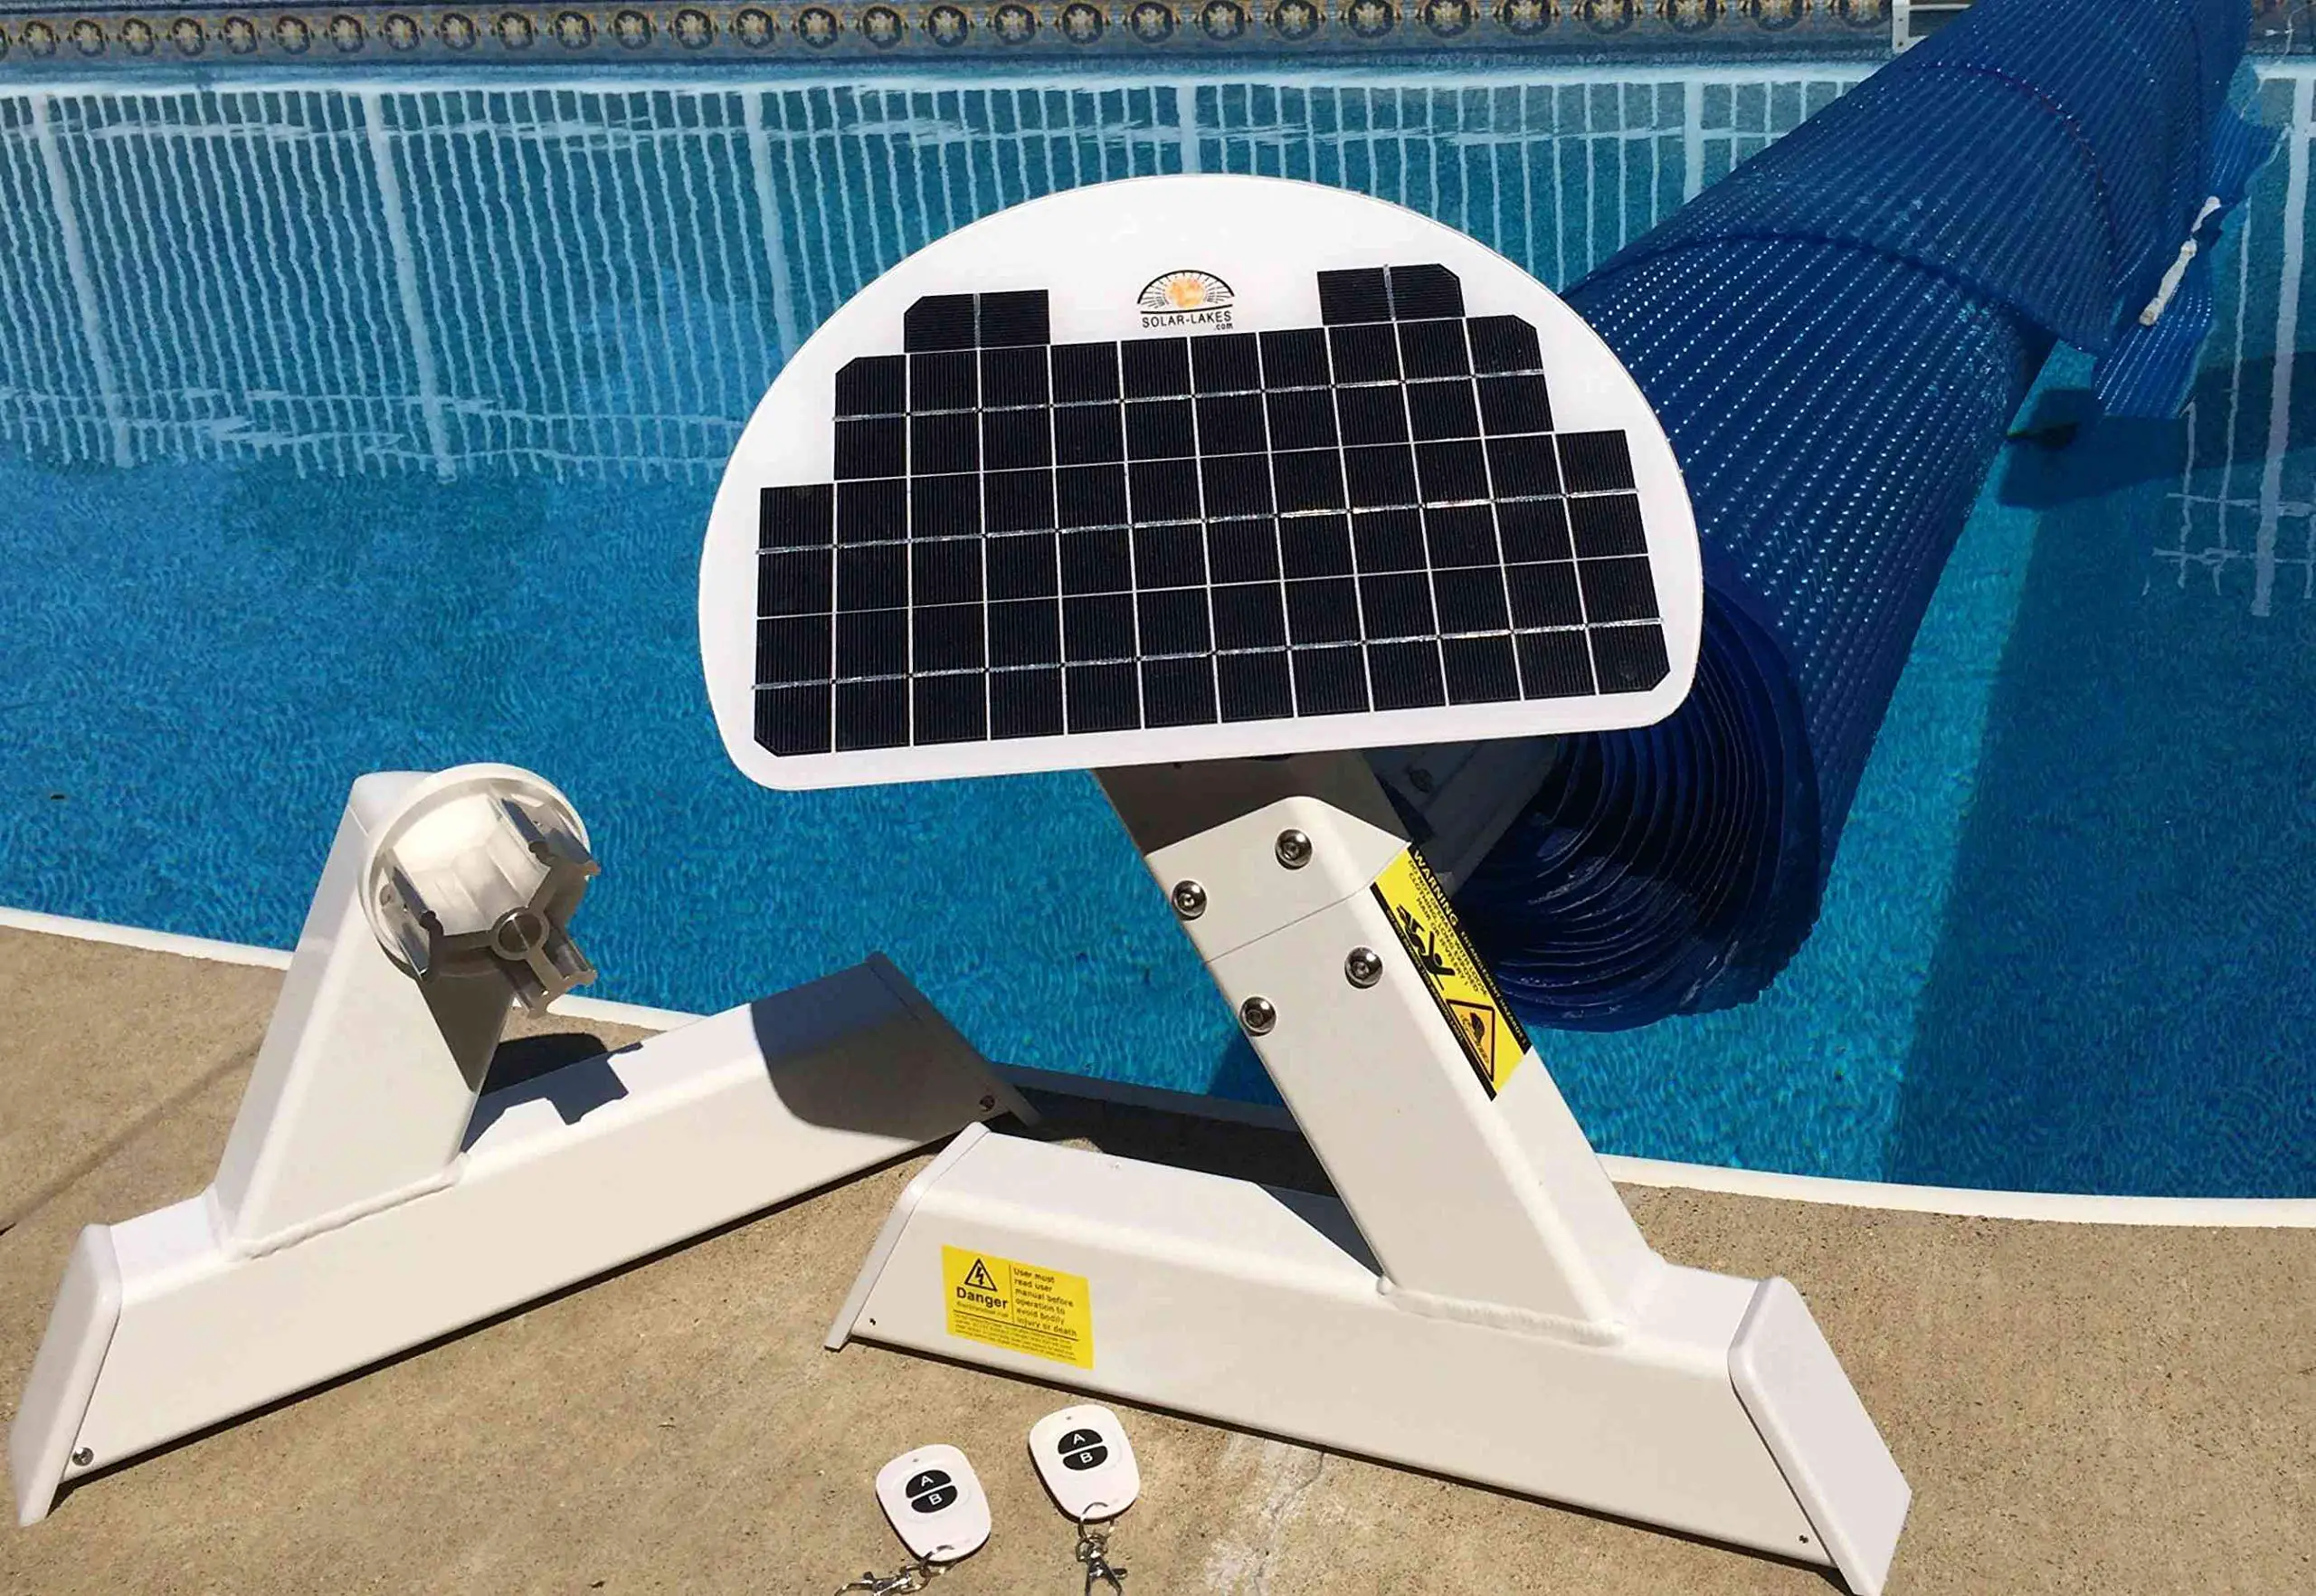 Amazon.com: Automatic Solar Blanket Cover Reel/Roller